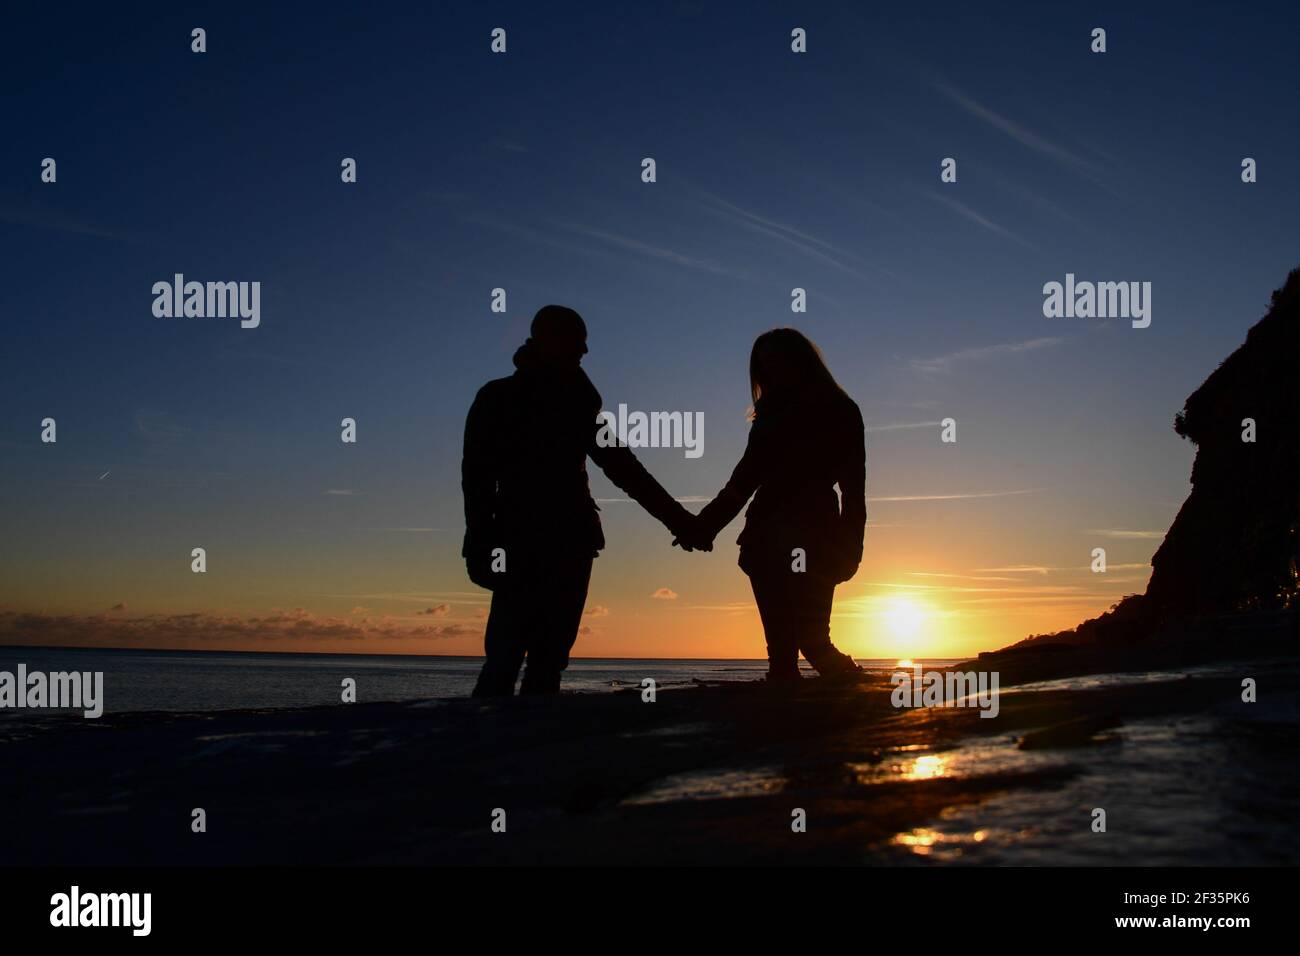 Two people holding hands on a beach at sunset Stock Photo